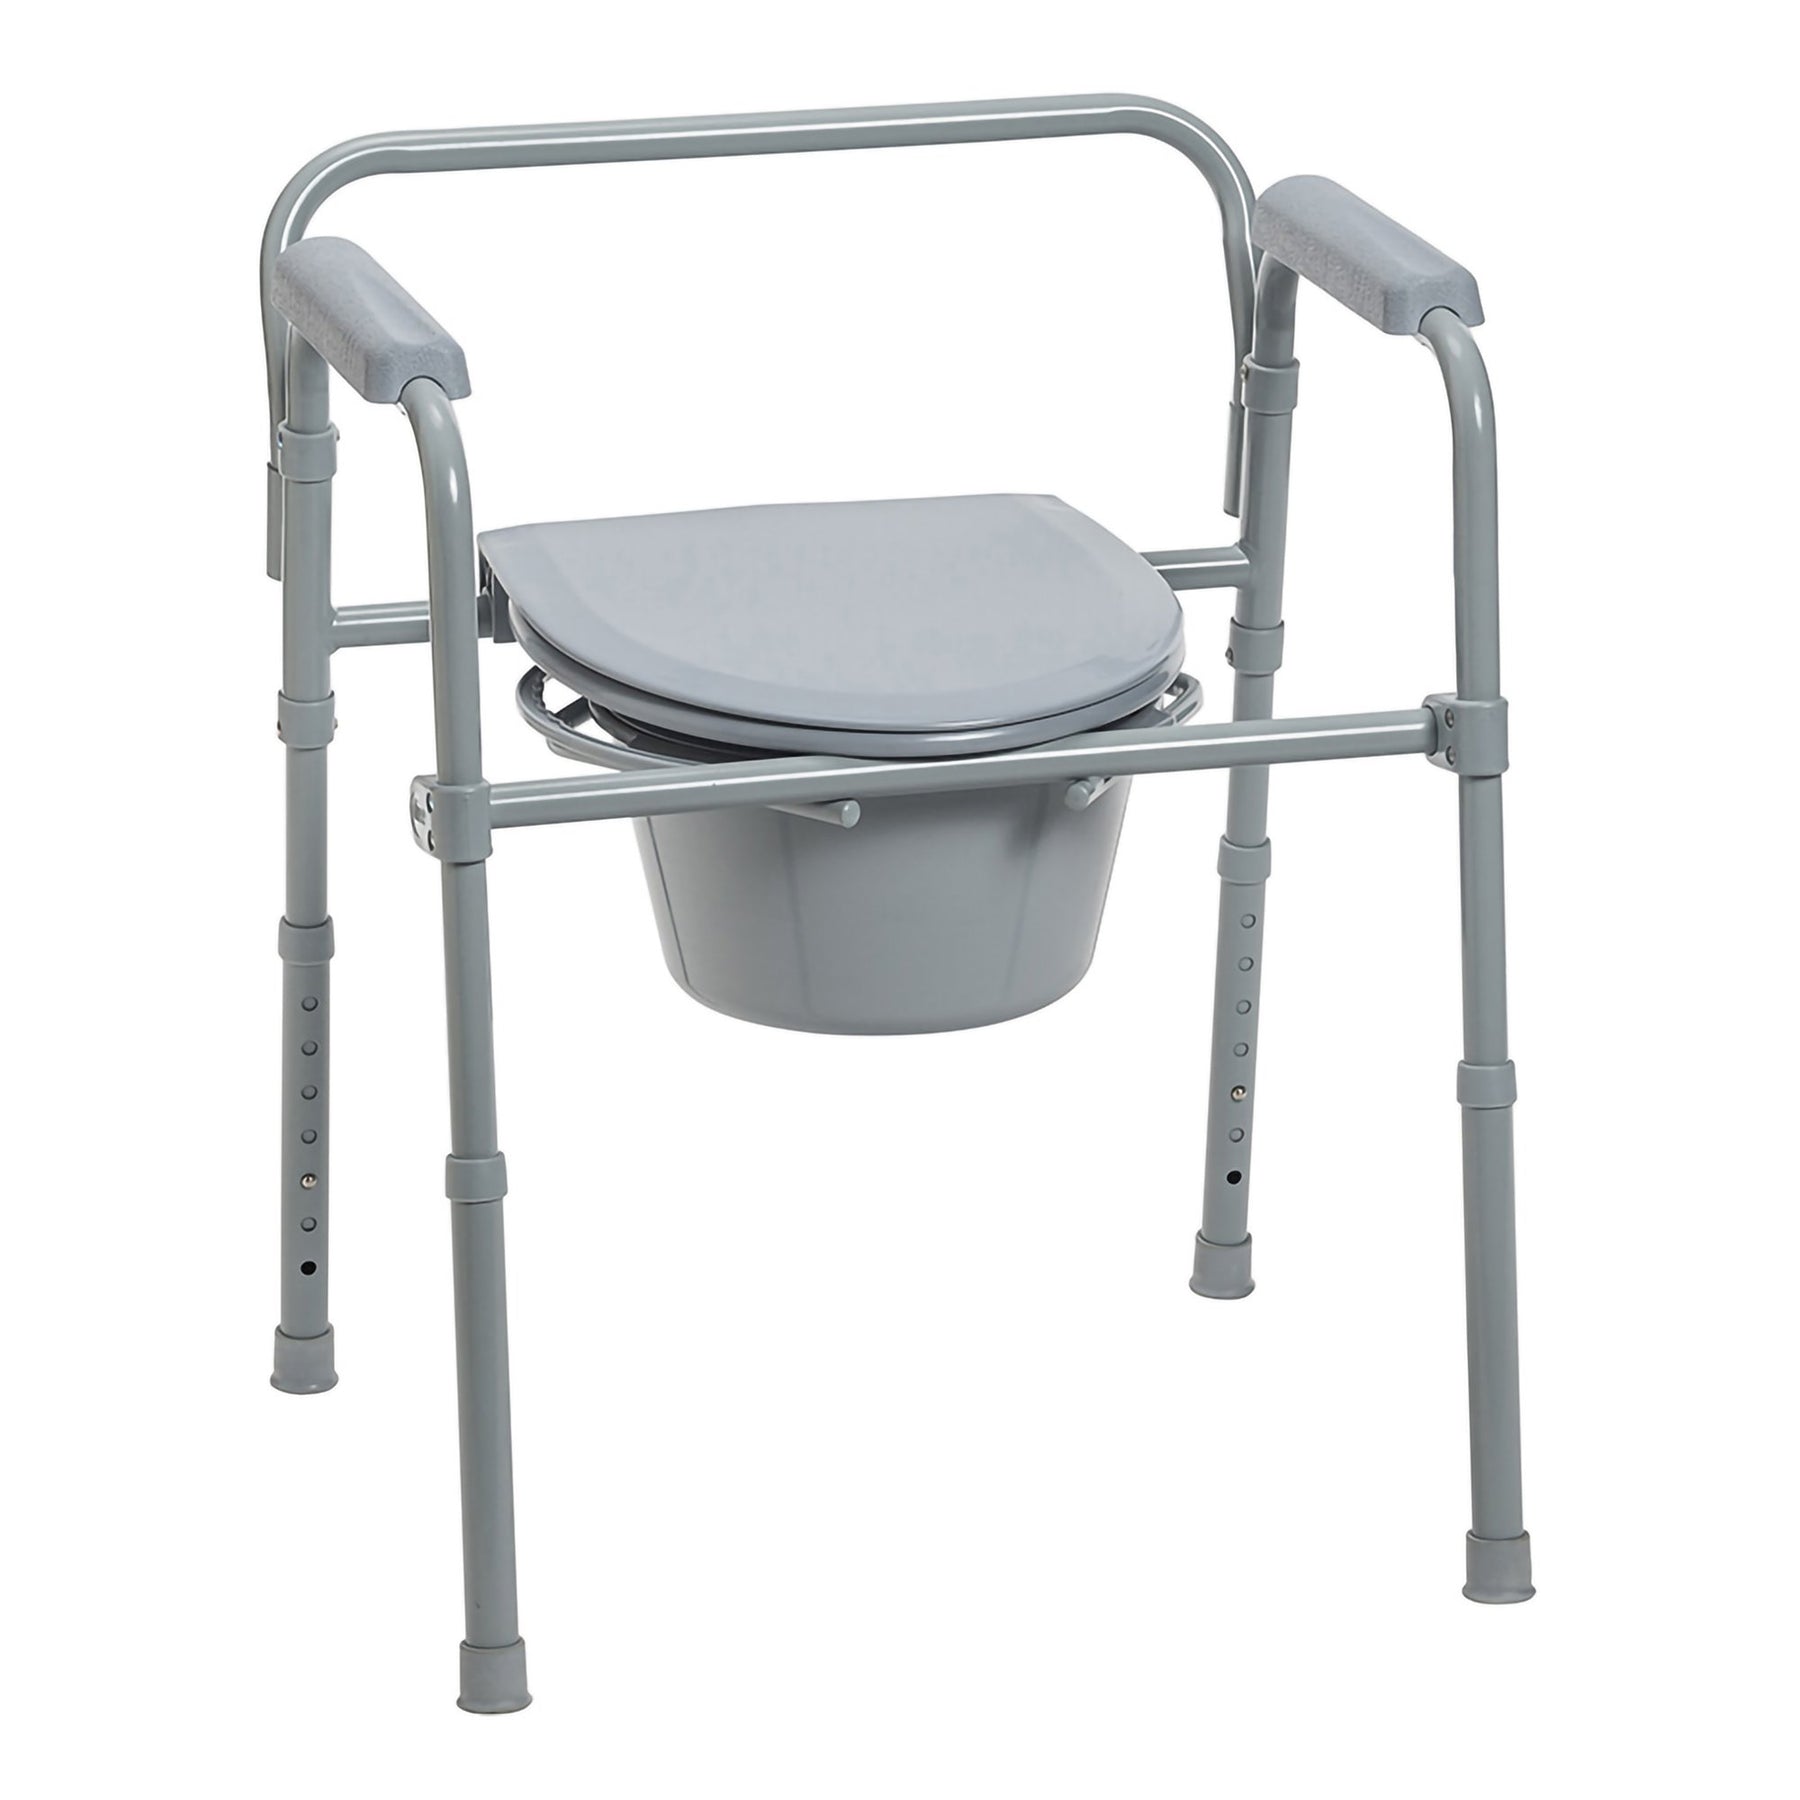 Standard Commode with Arm Rests